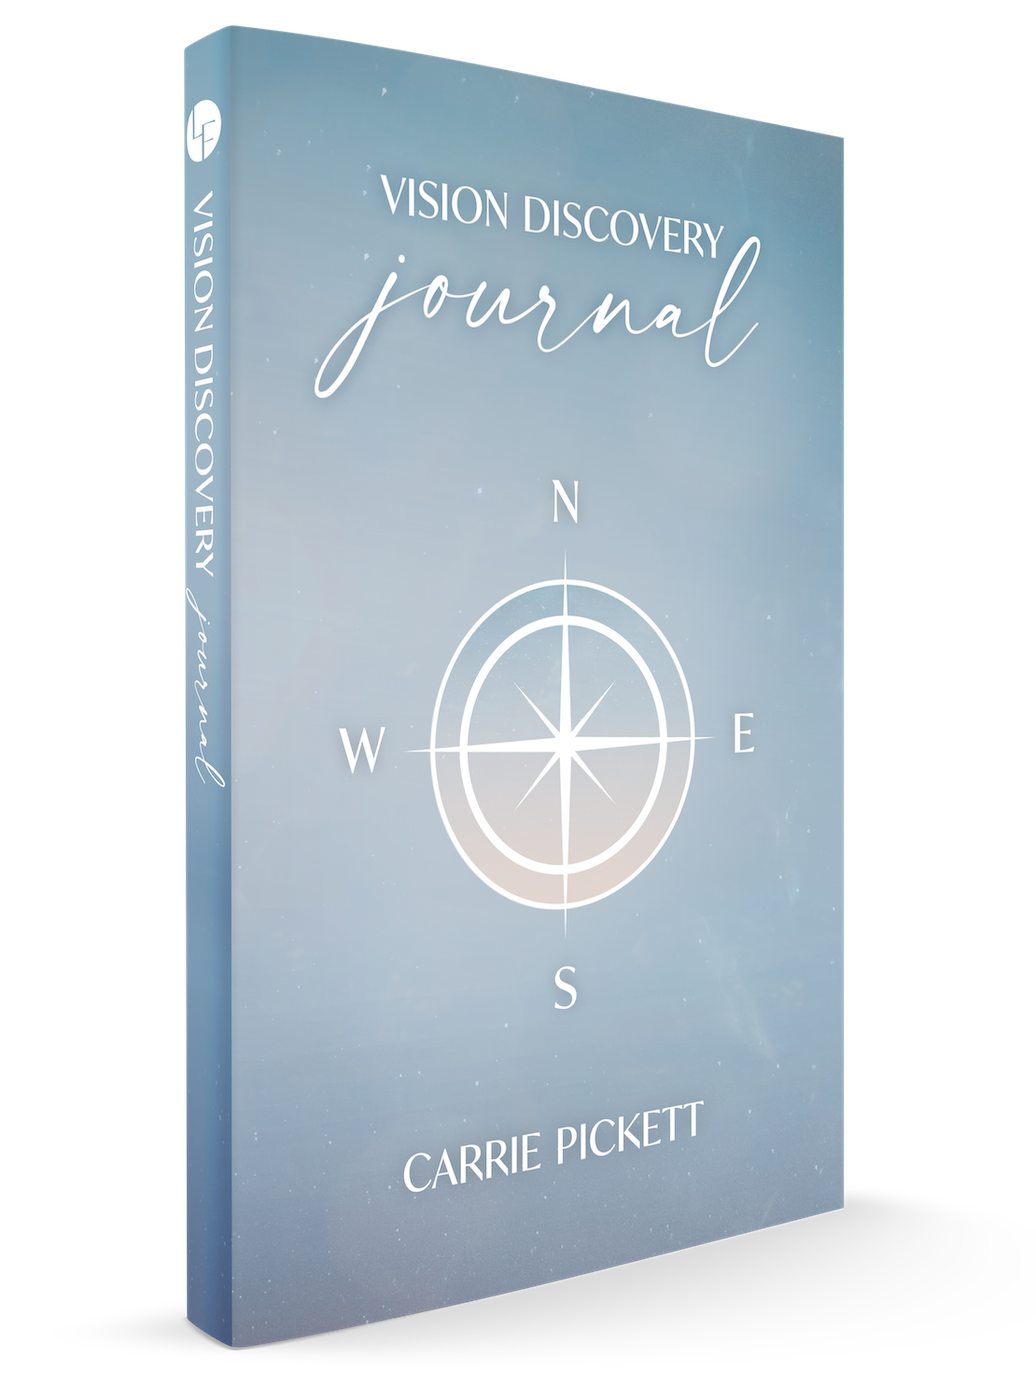 Vision Discovery Journal